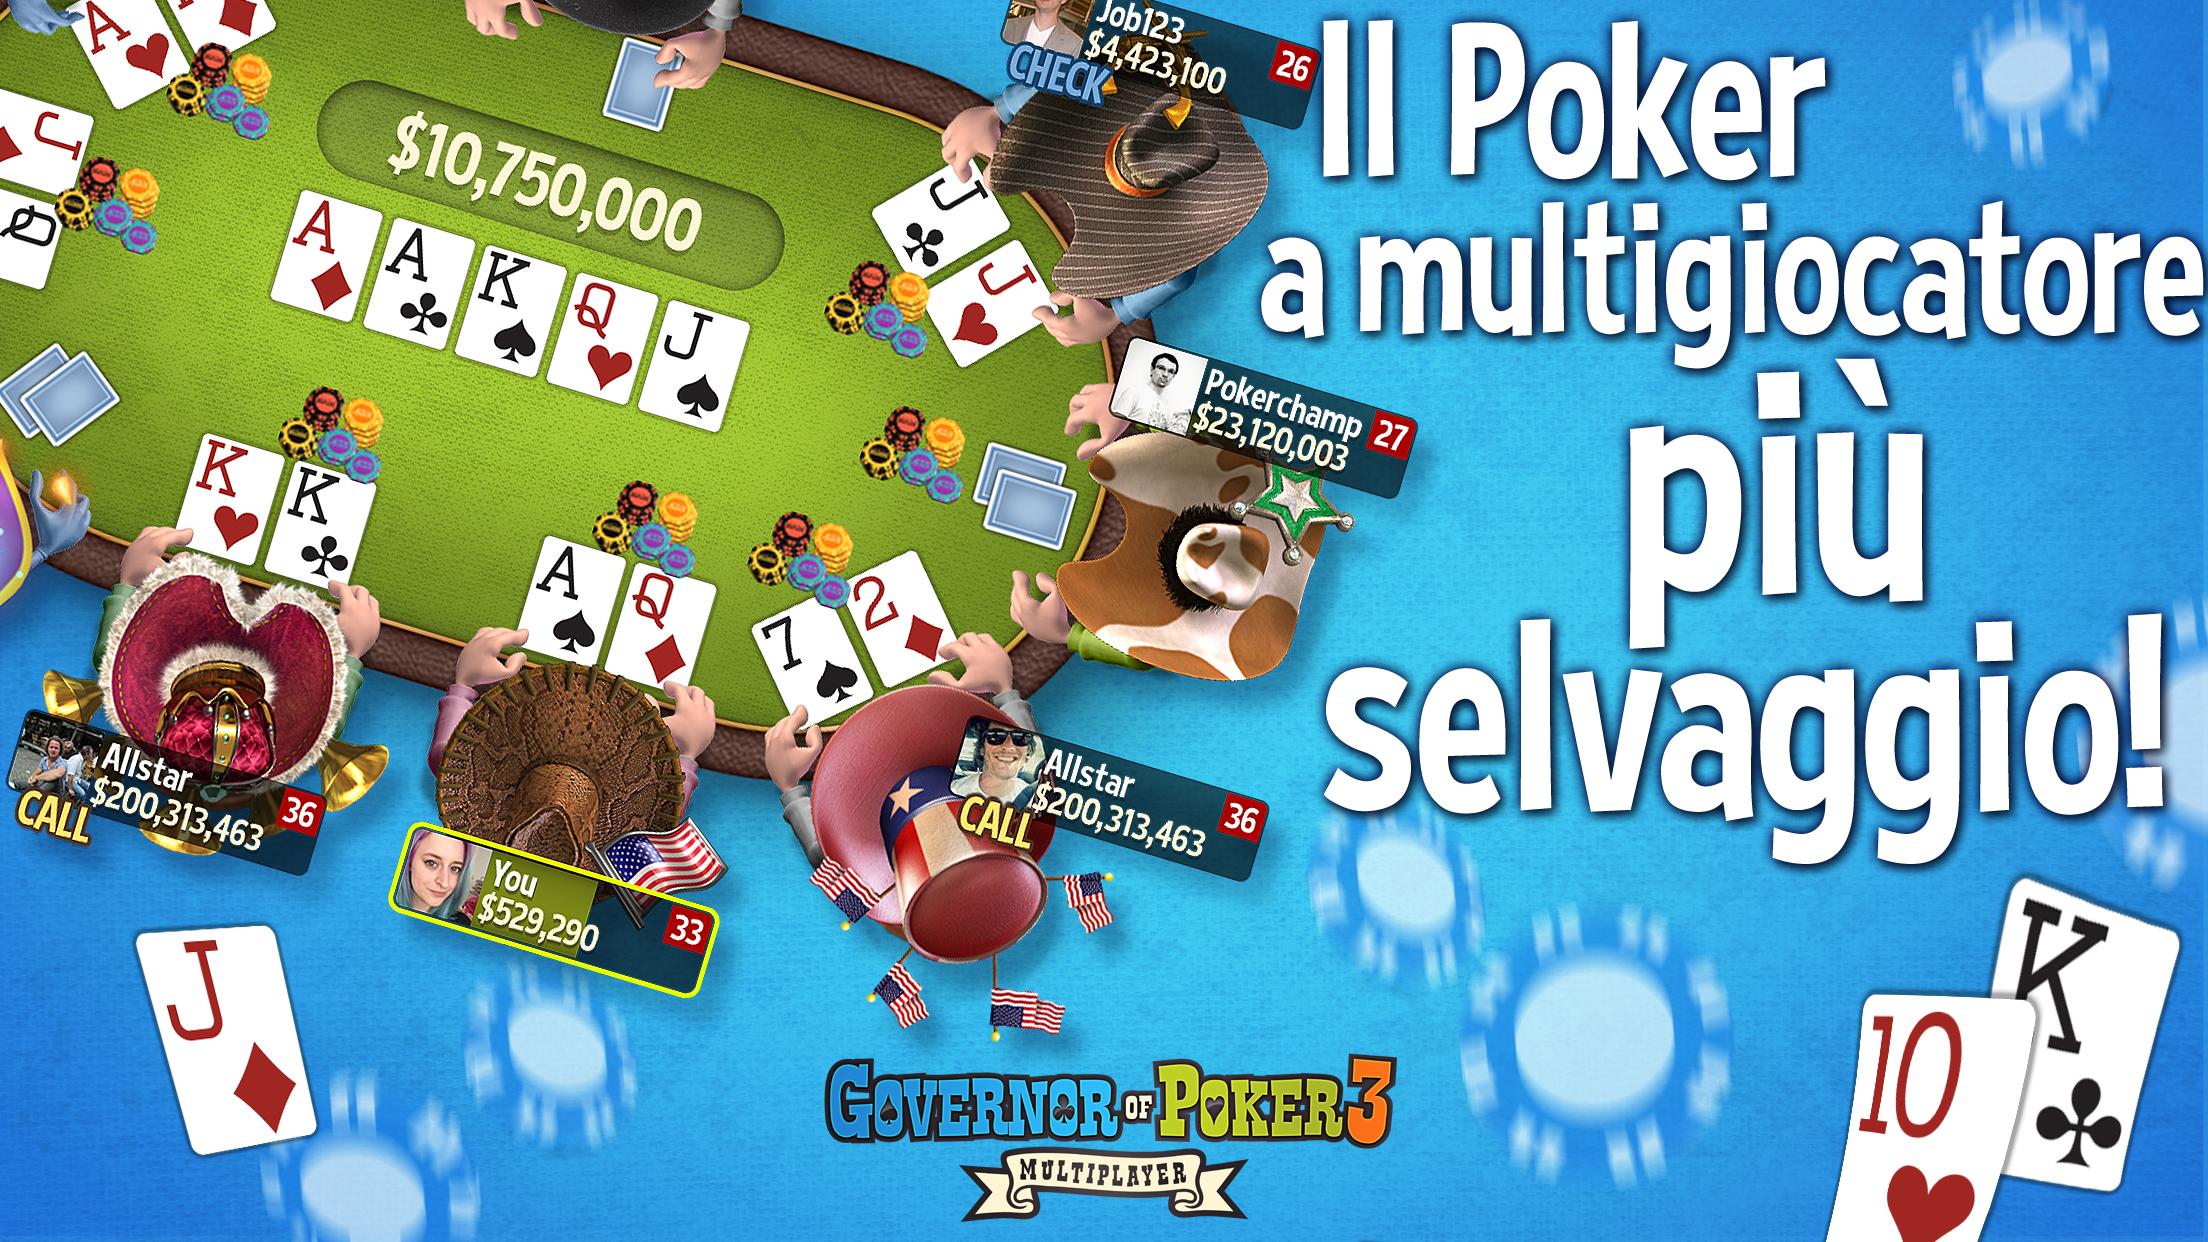 Android application Governor of Poker 3 - Texas screenshort